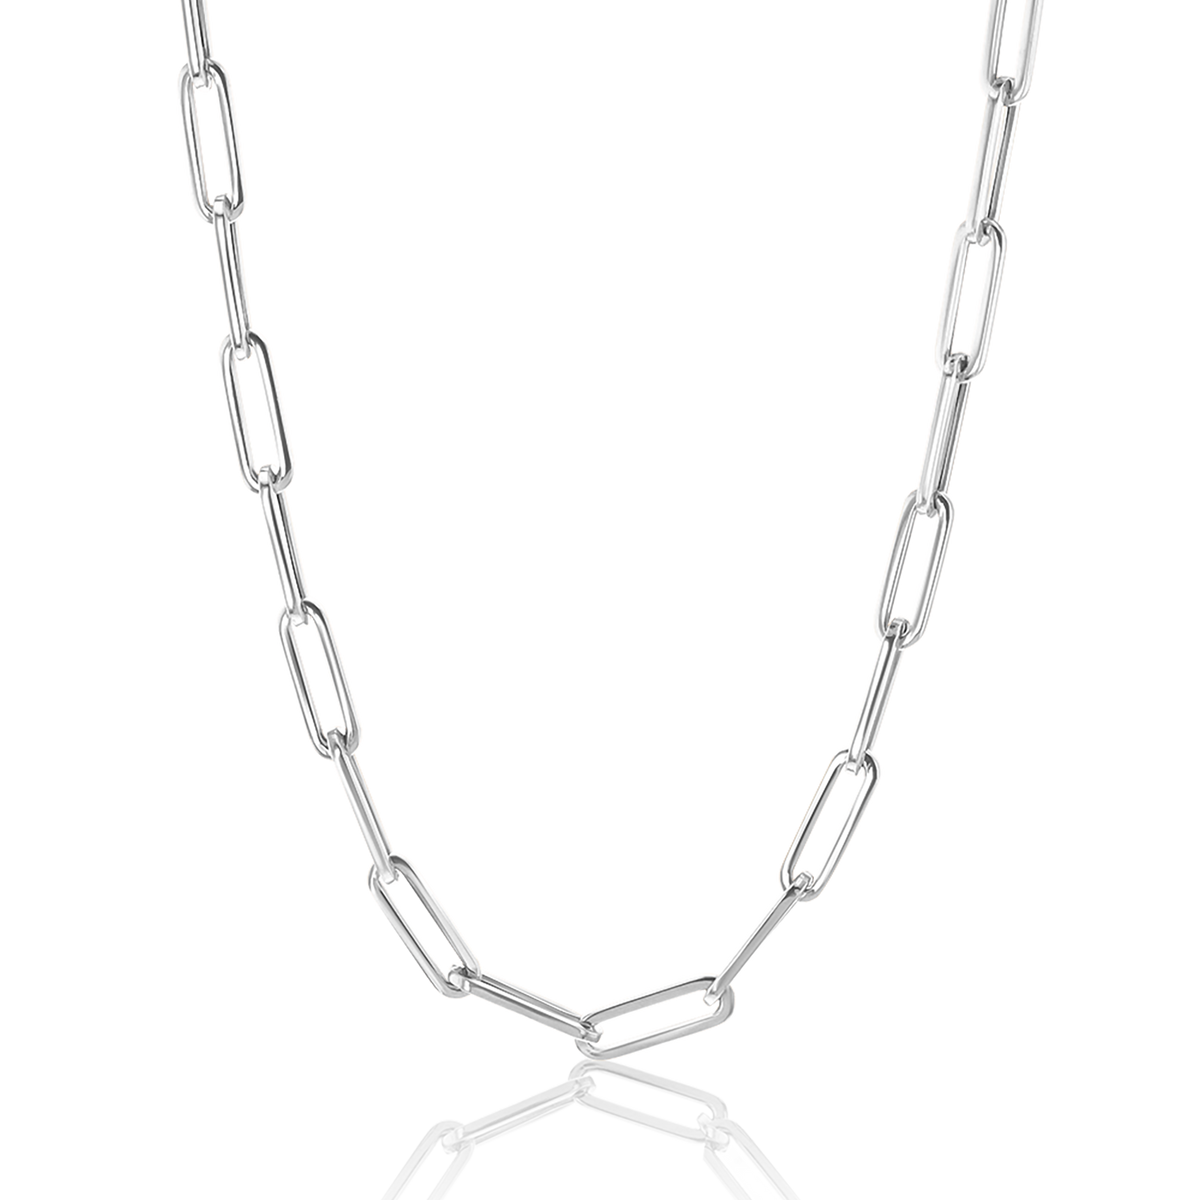 Stainless Steel Gold Chain Necklace - Hot Sale Items